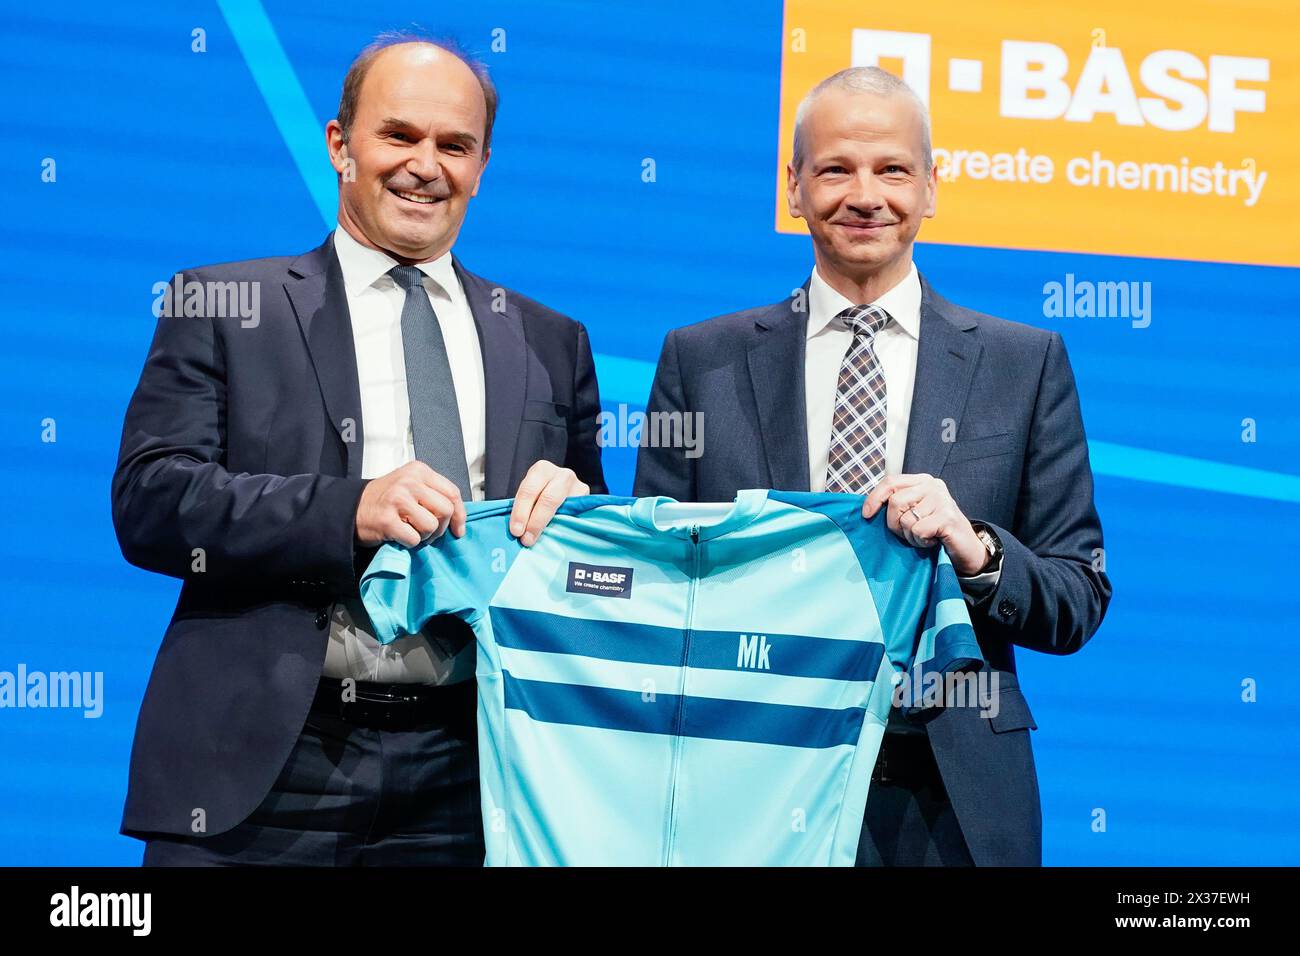 Mannheim, Germany. 25th Apr, 2024. Martin Brudermüller (l), Chairman of the Board of Executive Directors of BASF SE, hands over a cycling jersey to Markus Kamieth, future Chairman of the Board of Executive Directors of BASF SE, at the Annual Meeting of the chemical company BASF. It is the last shareholders' meeting of Chairman Brudermüller. Kamieth will take office at the end of the Annual Meeting. Credit: Uwe Anspach/dpa/Alamy Live News Stock Photo